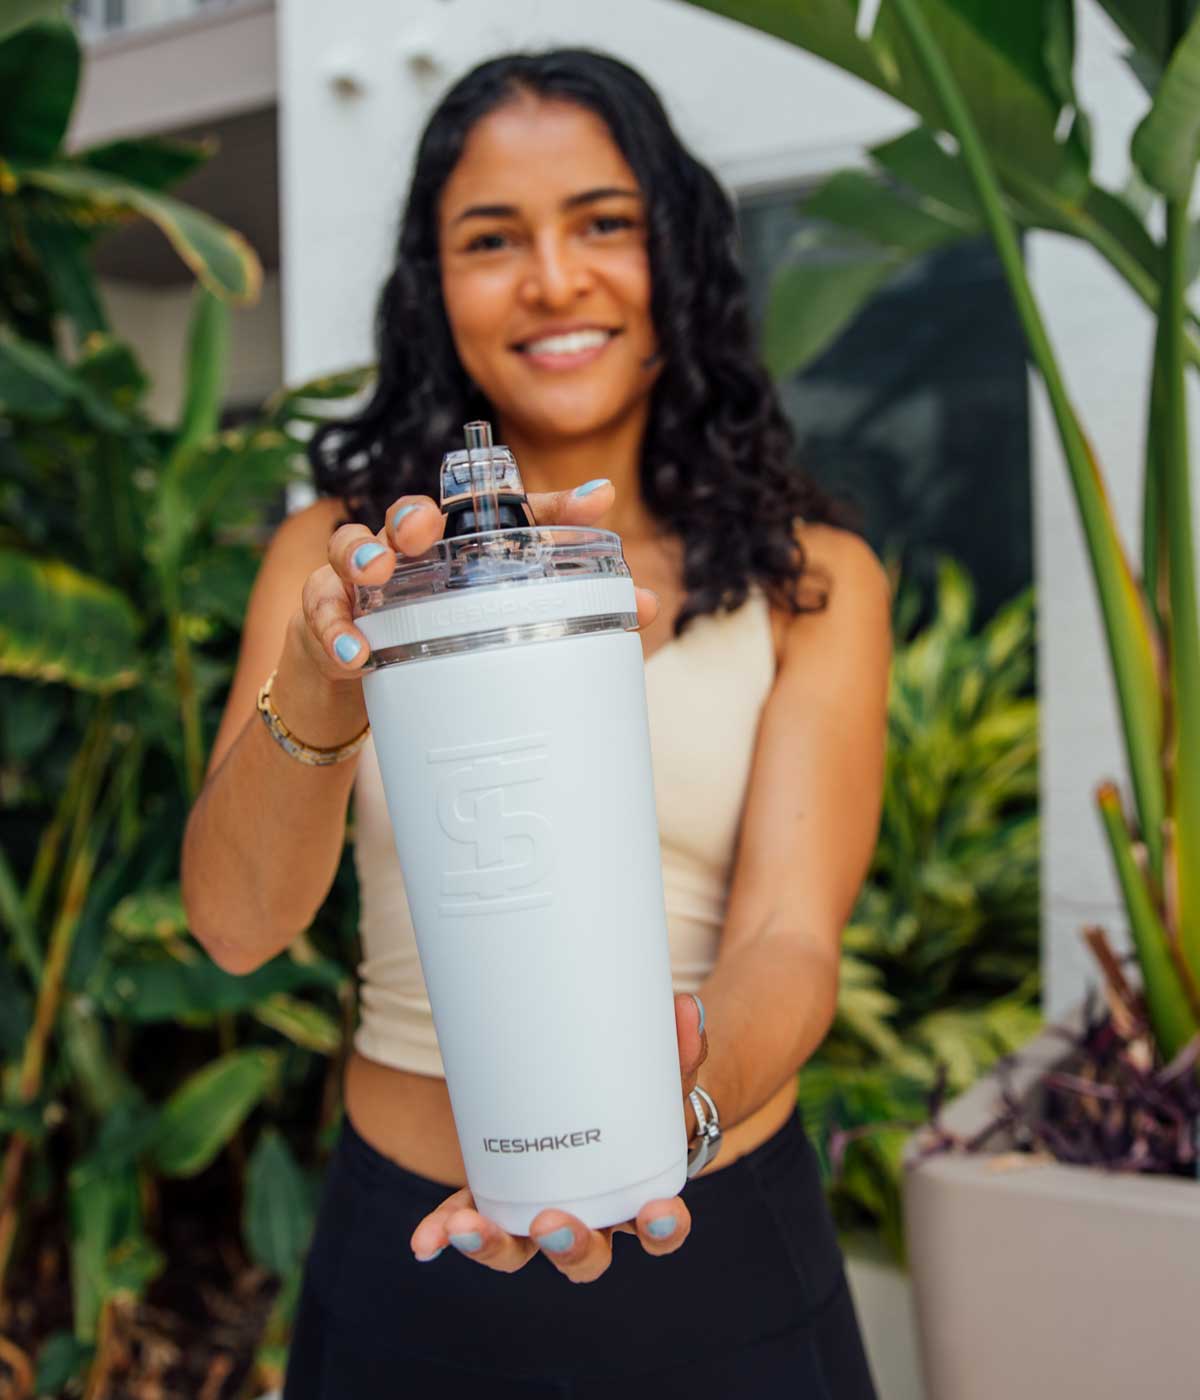 This image shows an athletic hispanic woman holding a white-colored 26oz Flex Bottle with both of her hands and her arms stretch out in front of her, showing the bottle to the camera